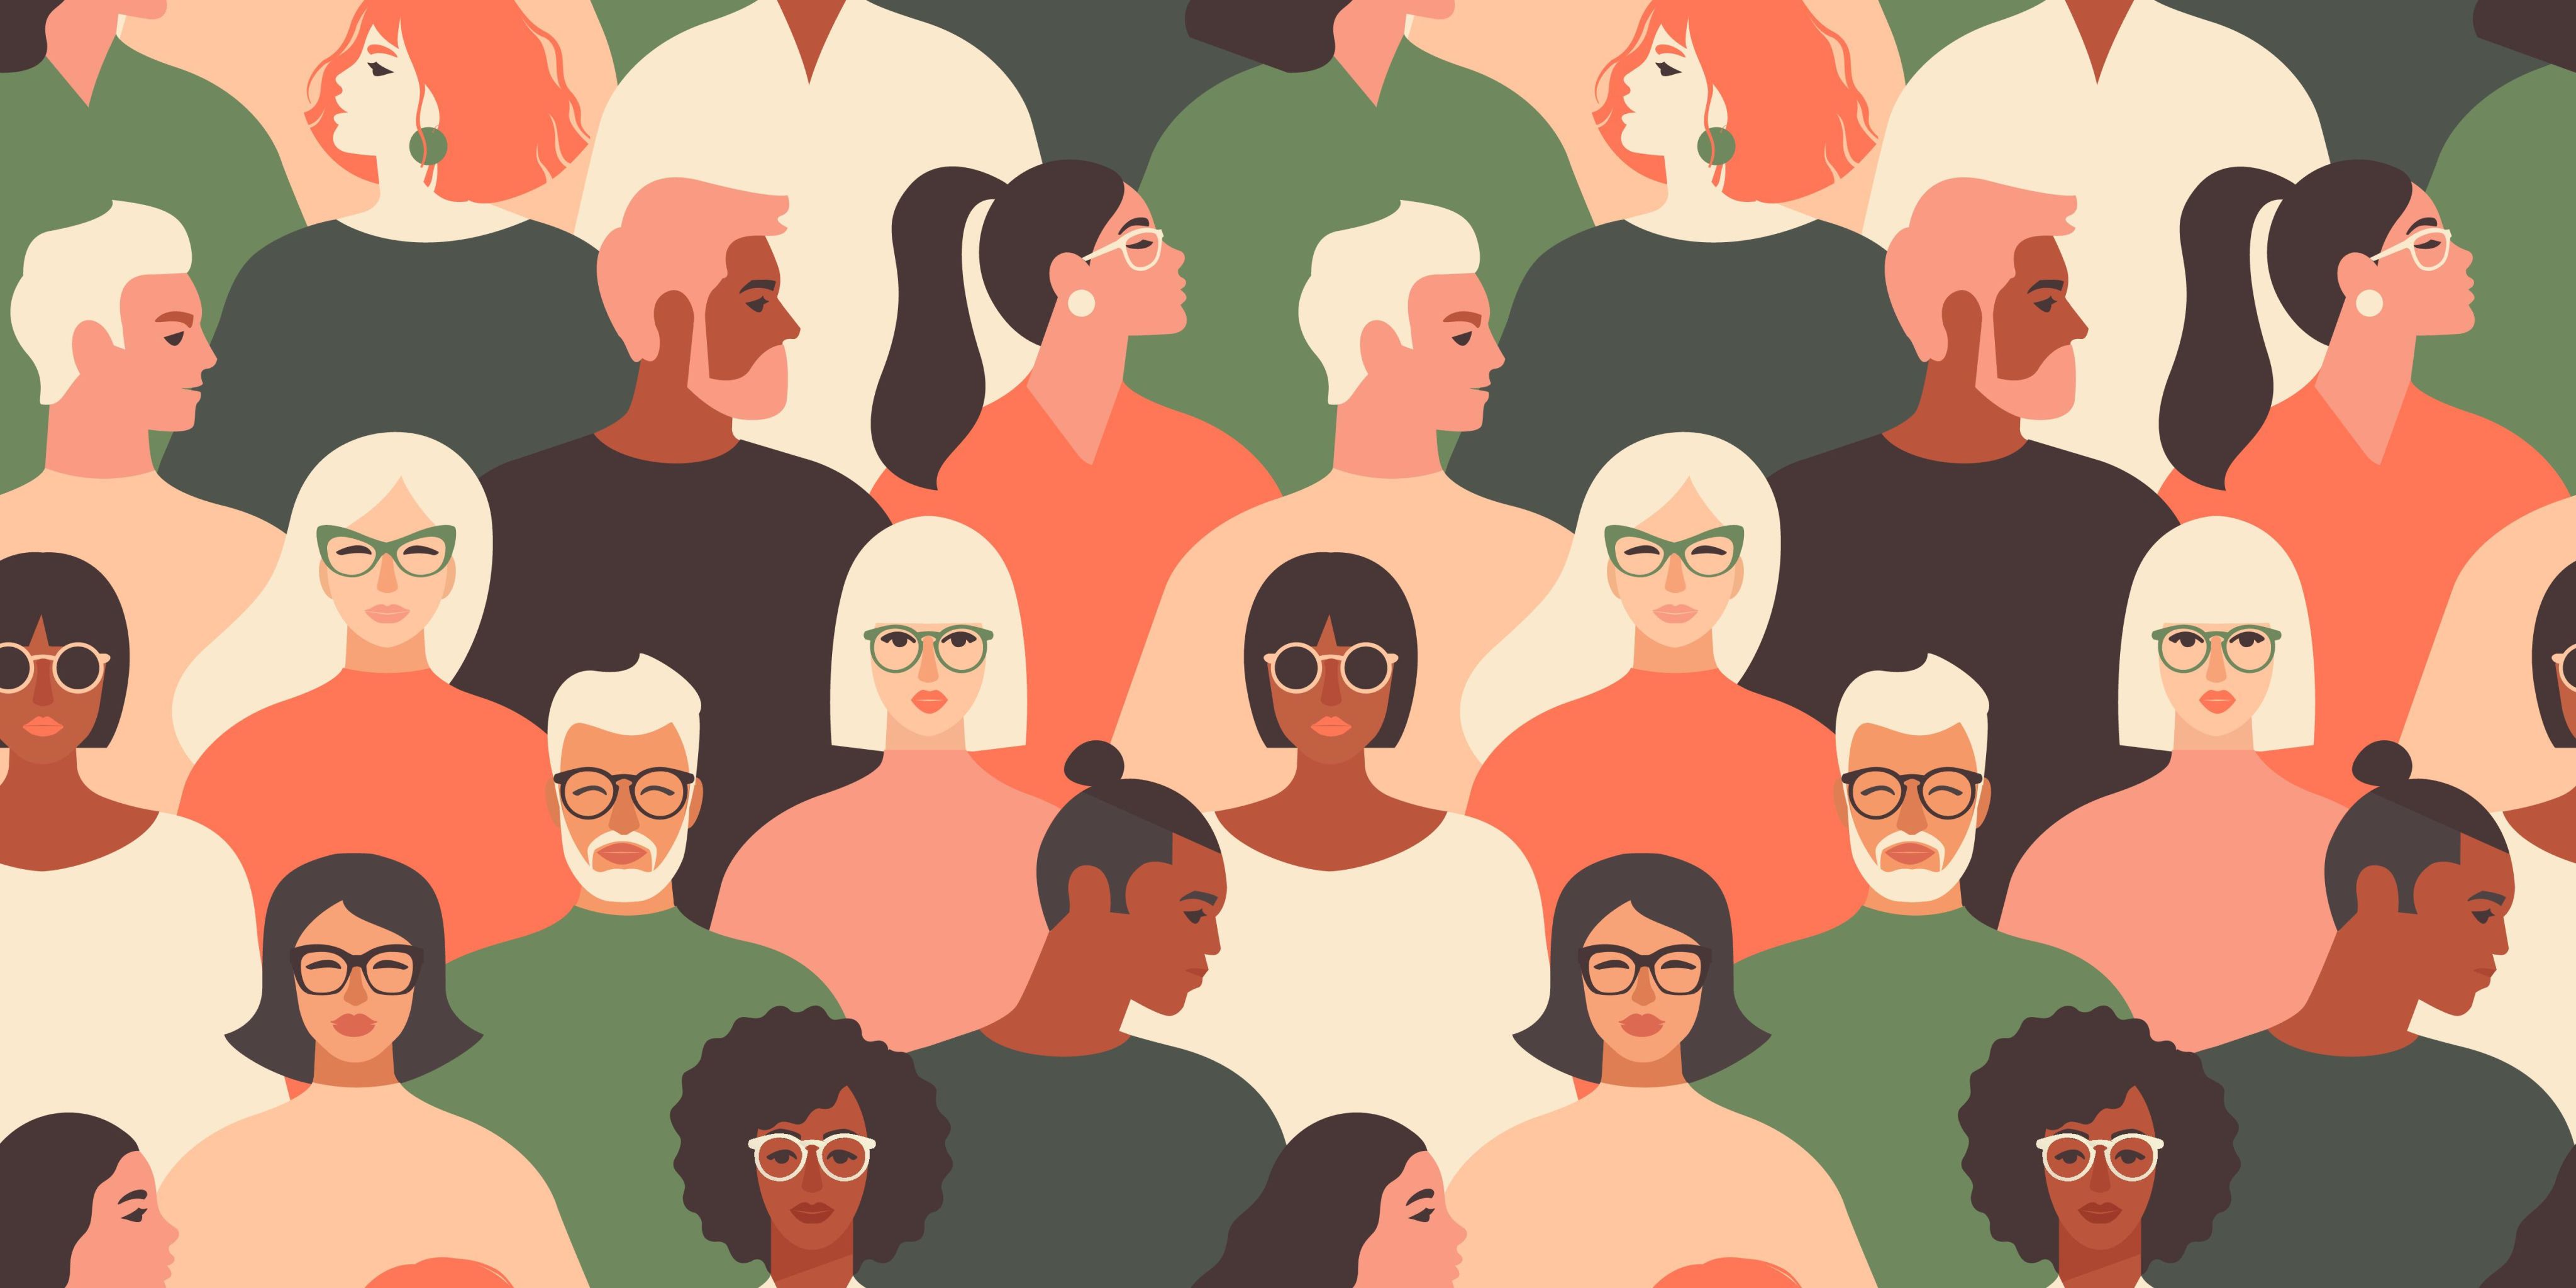 Illustration of a group of diverse people